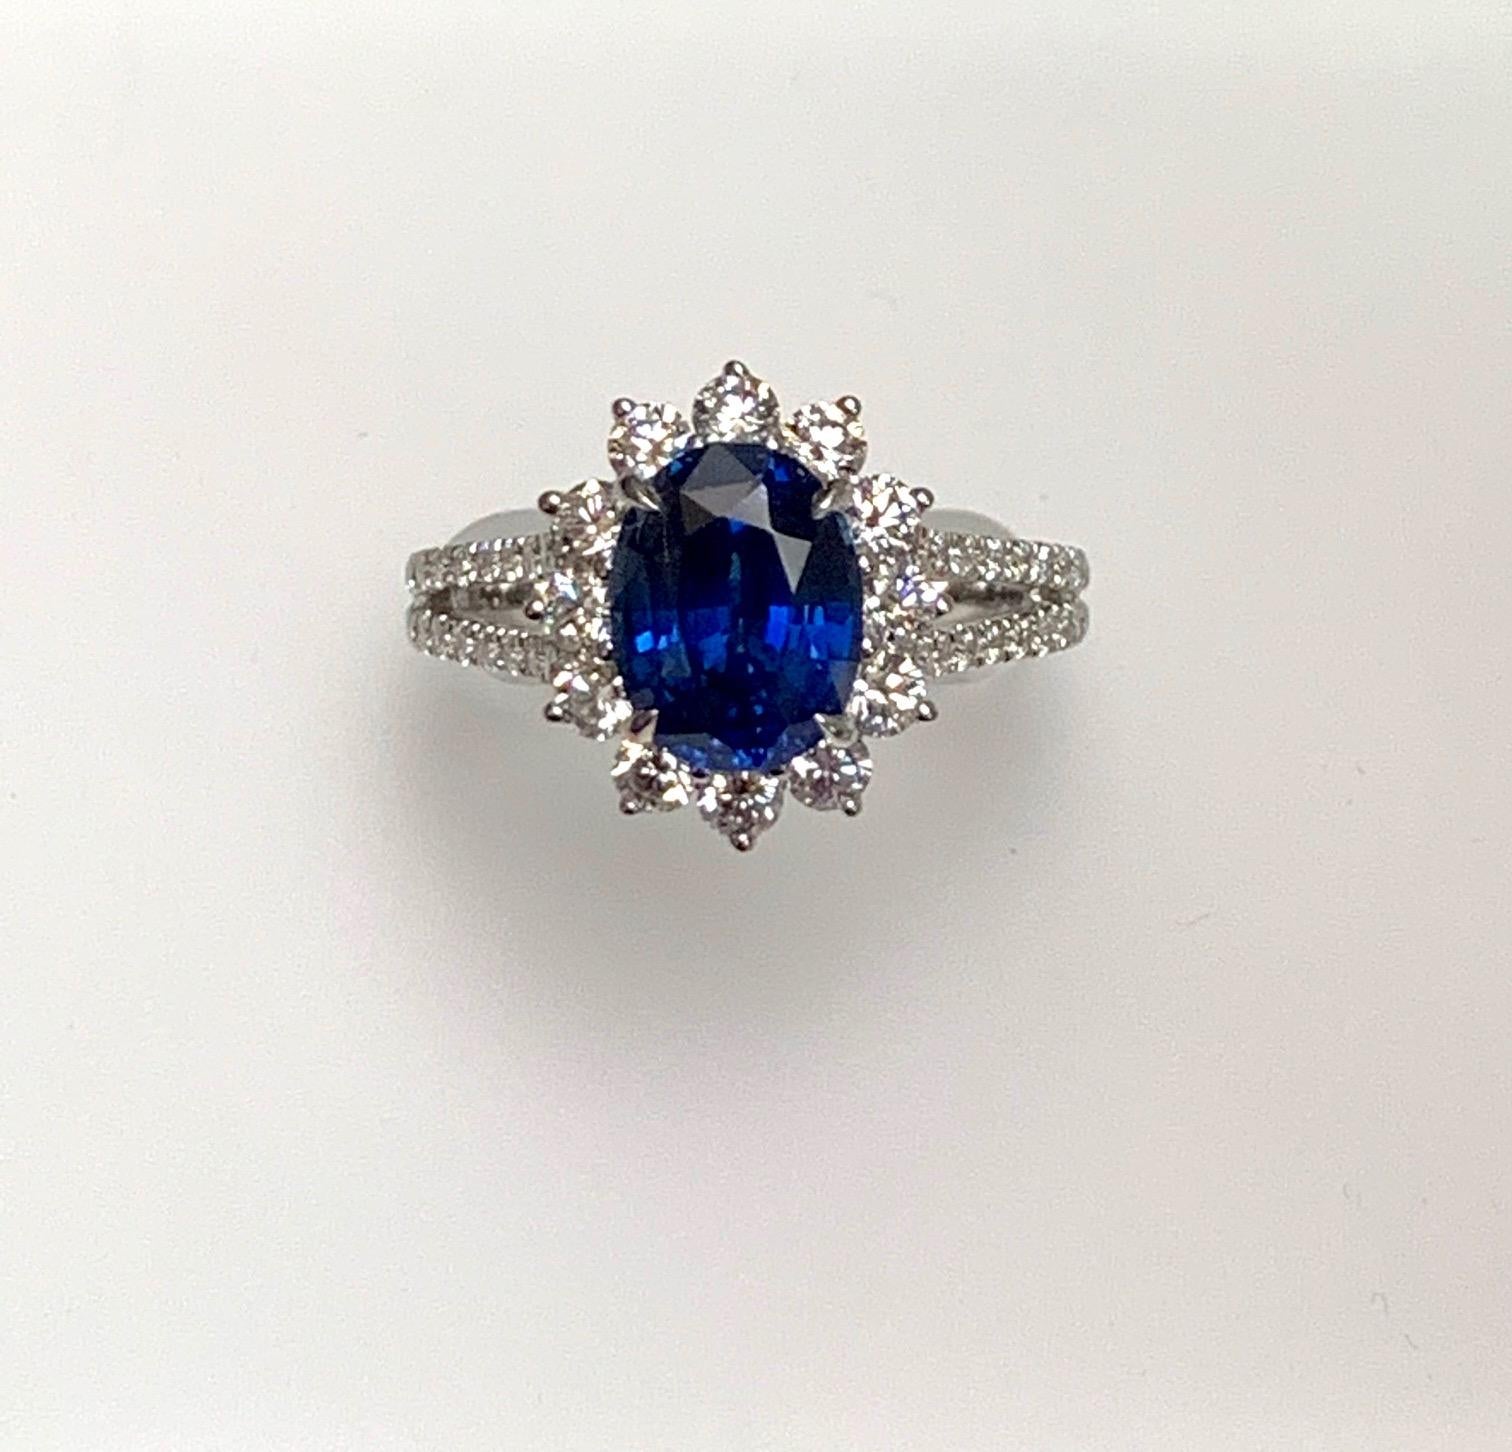 2.82 Carat oval sapphire set in 18k white gold ring with 0.97 ct diamonds around it and on th split shank .